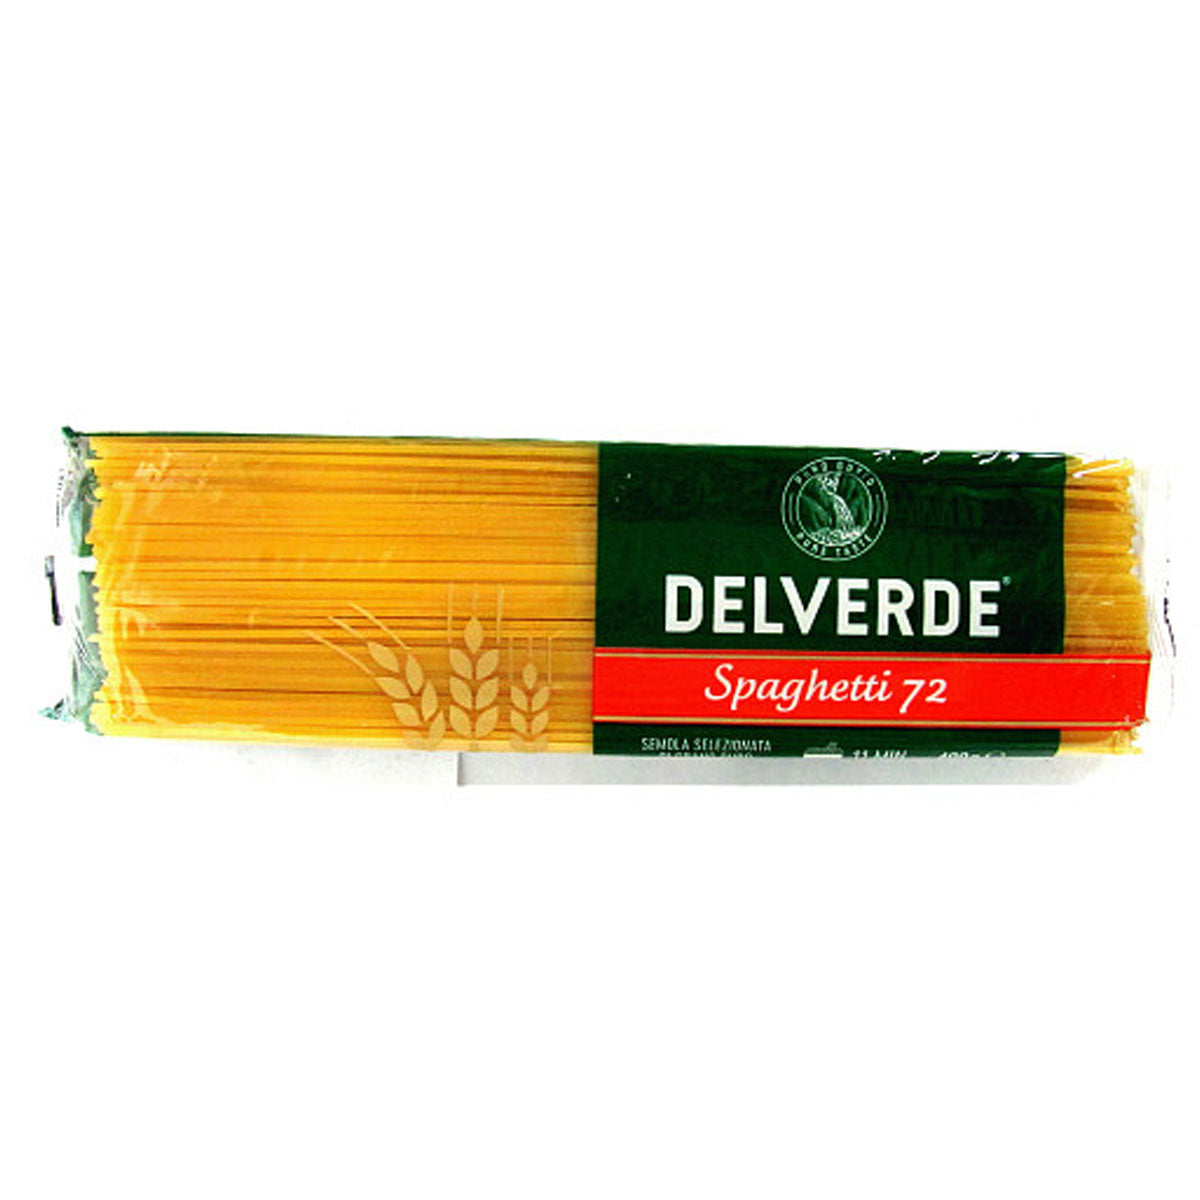 A package of Del Verde - Spaghetti - 400g with a yellow label on it.